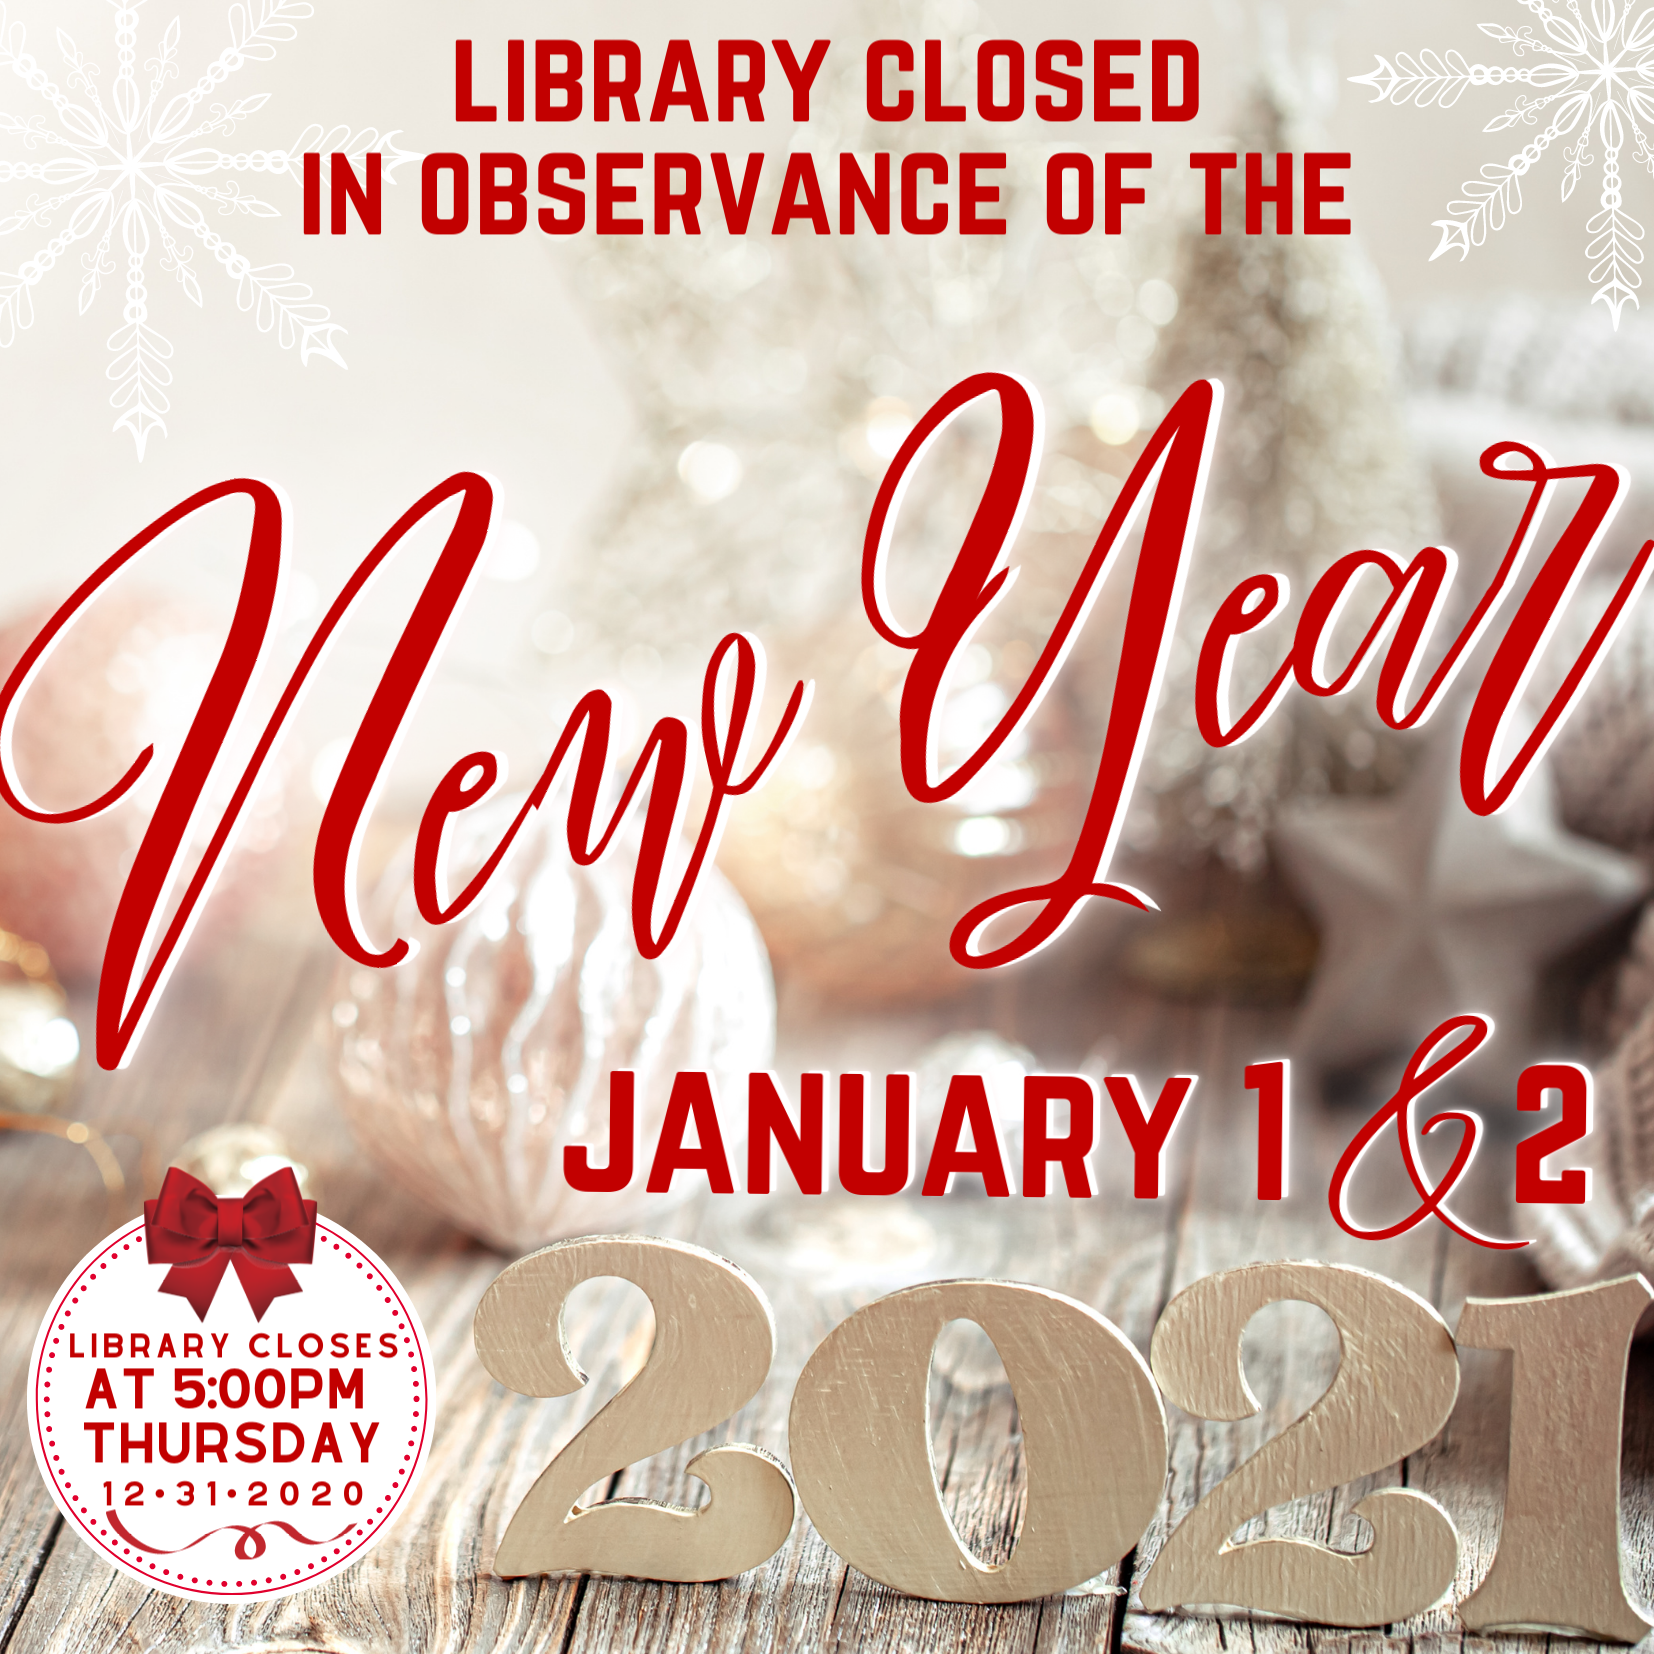 The Pasadena Public Library will be closed January 1-3 in observance of the New Year!